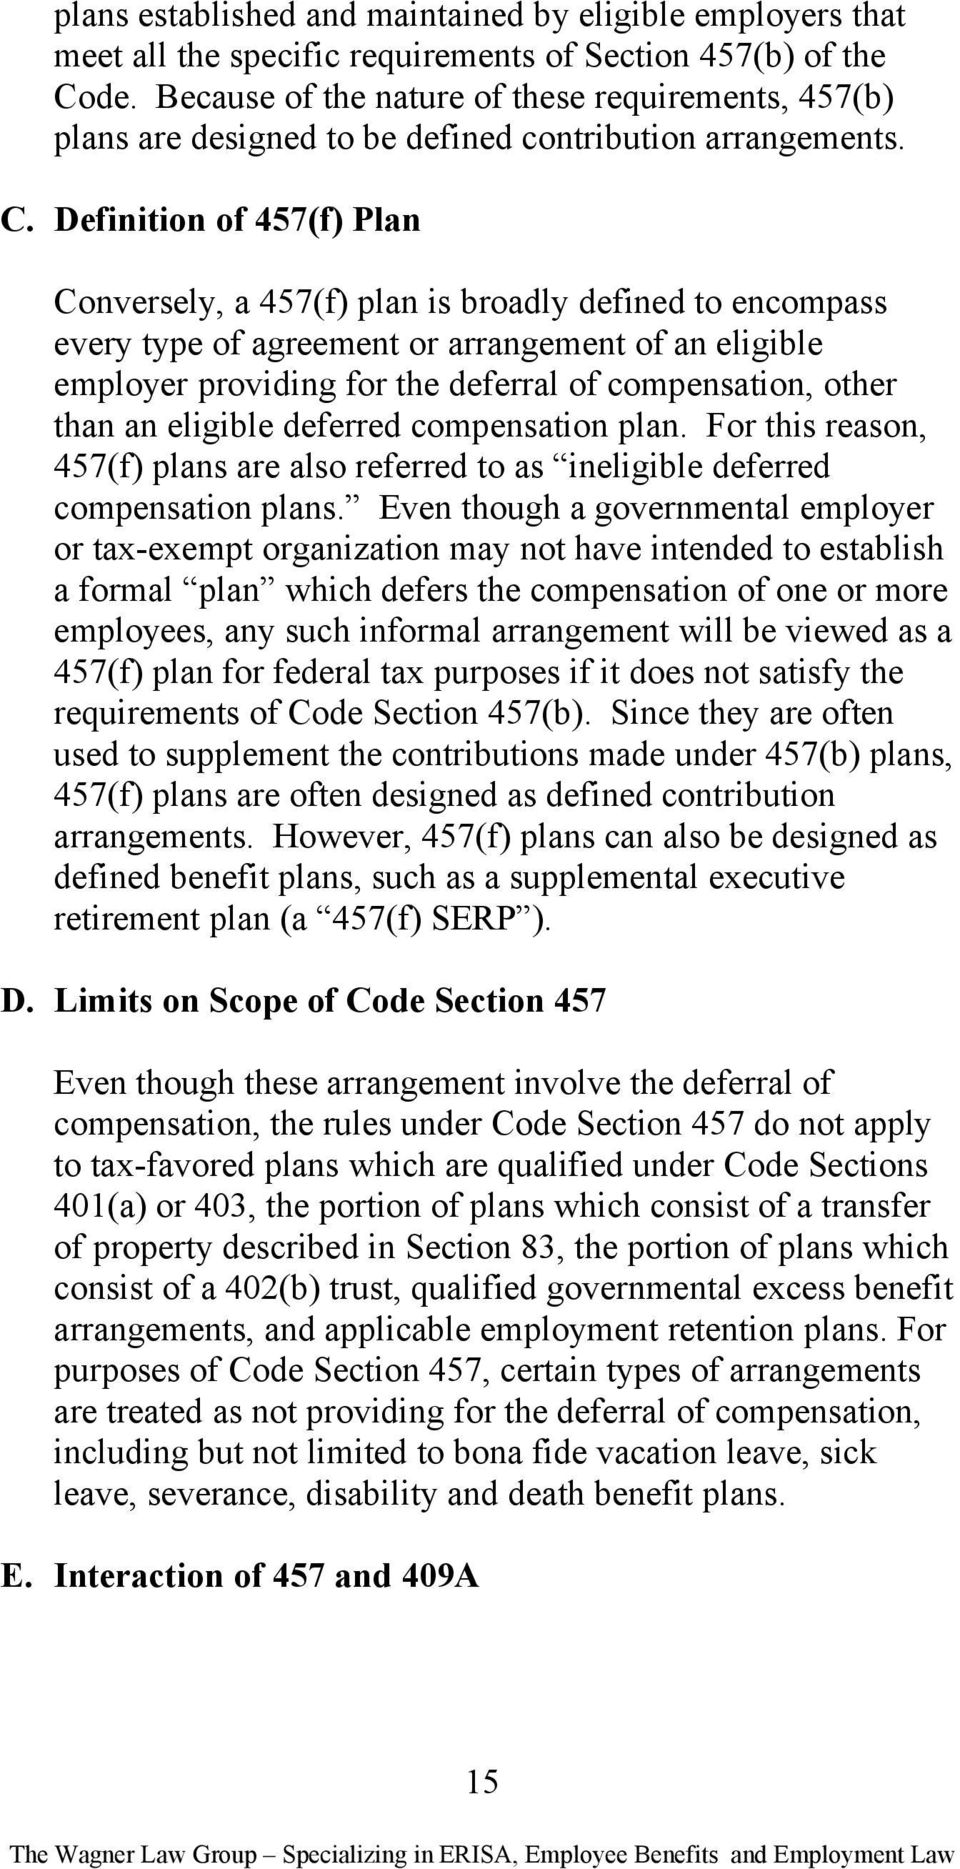 Definition of 457(f) Plan Conversely, a 457(f) plan is broadly defined to encompass every type of agreement or arrangement of an eligible employer providing for the deferral of compensation, other